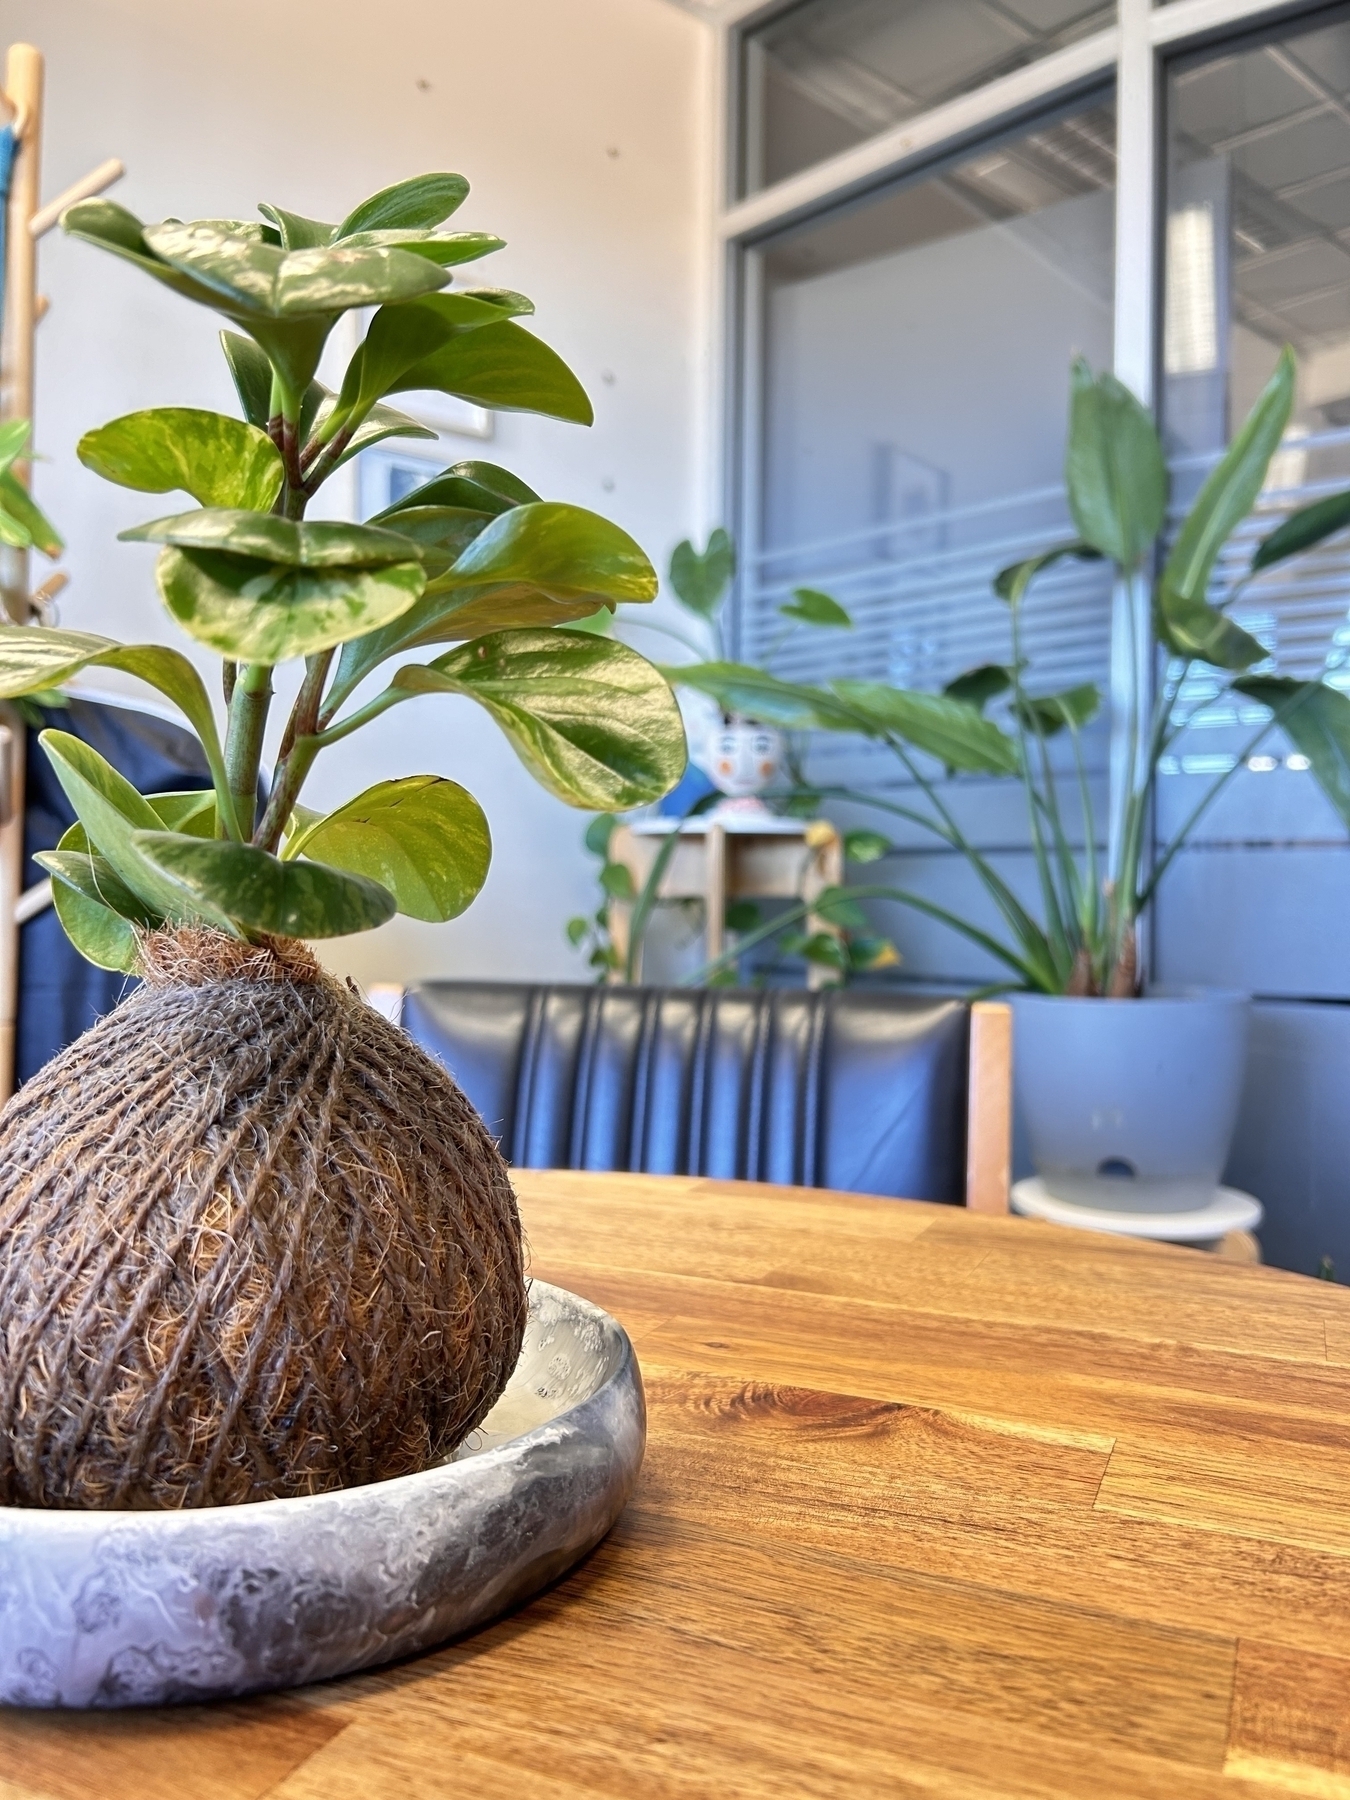 Some plants in the background with a kokedama on a table in the foreground